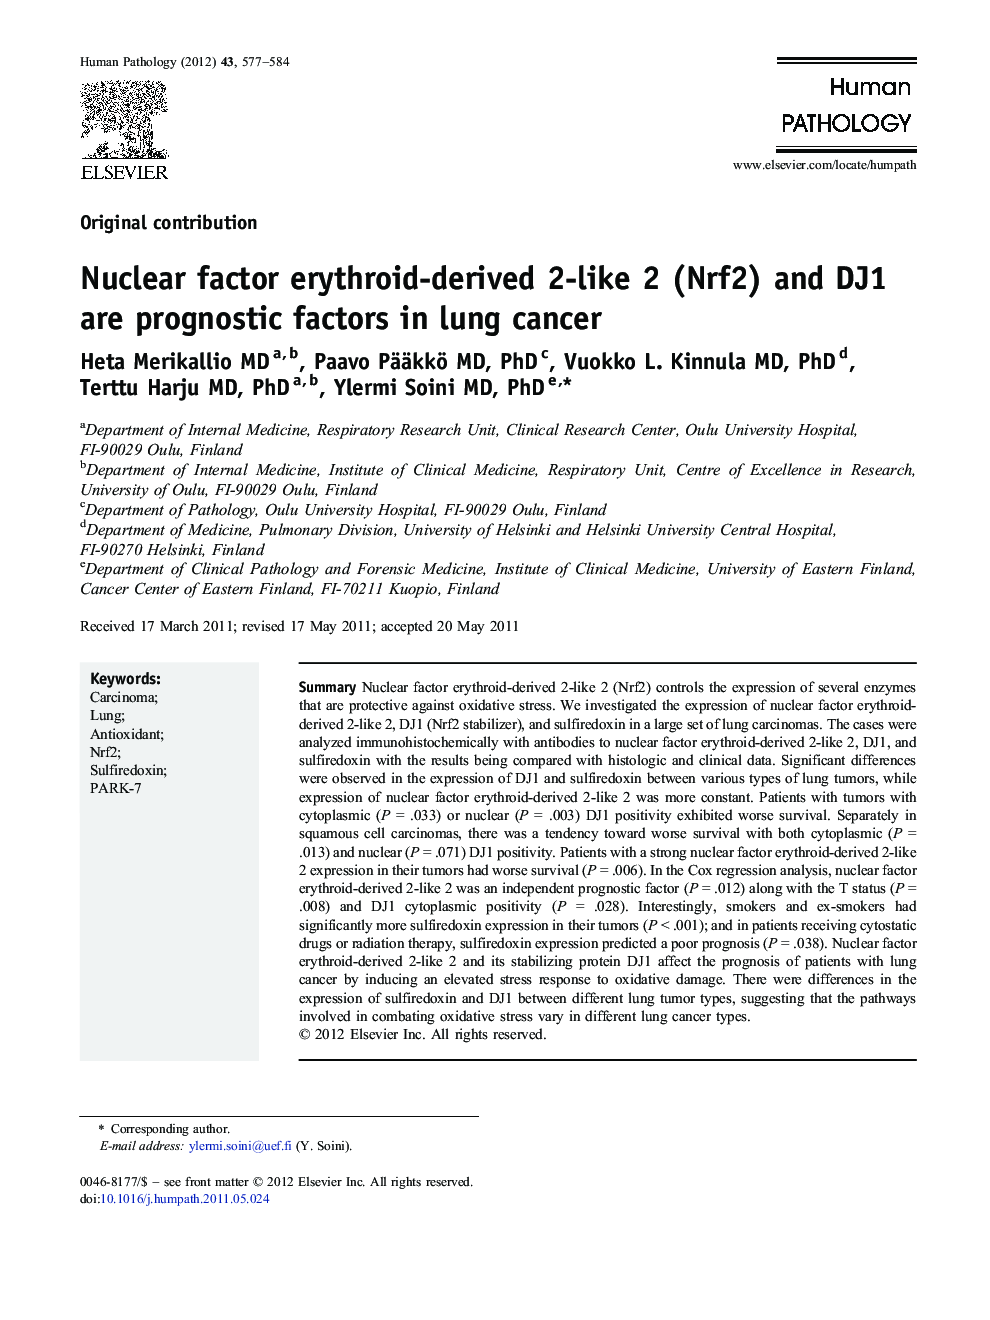 Nuclear factor erythroid-derived 2-like 2 (Nrf2) and DJ1 are prognostic factors in lung cancer